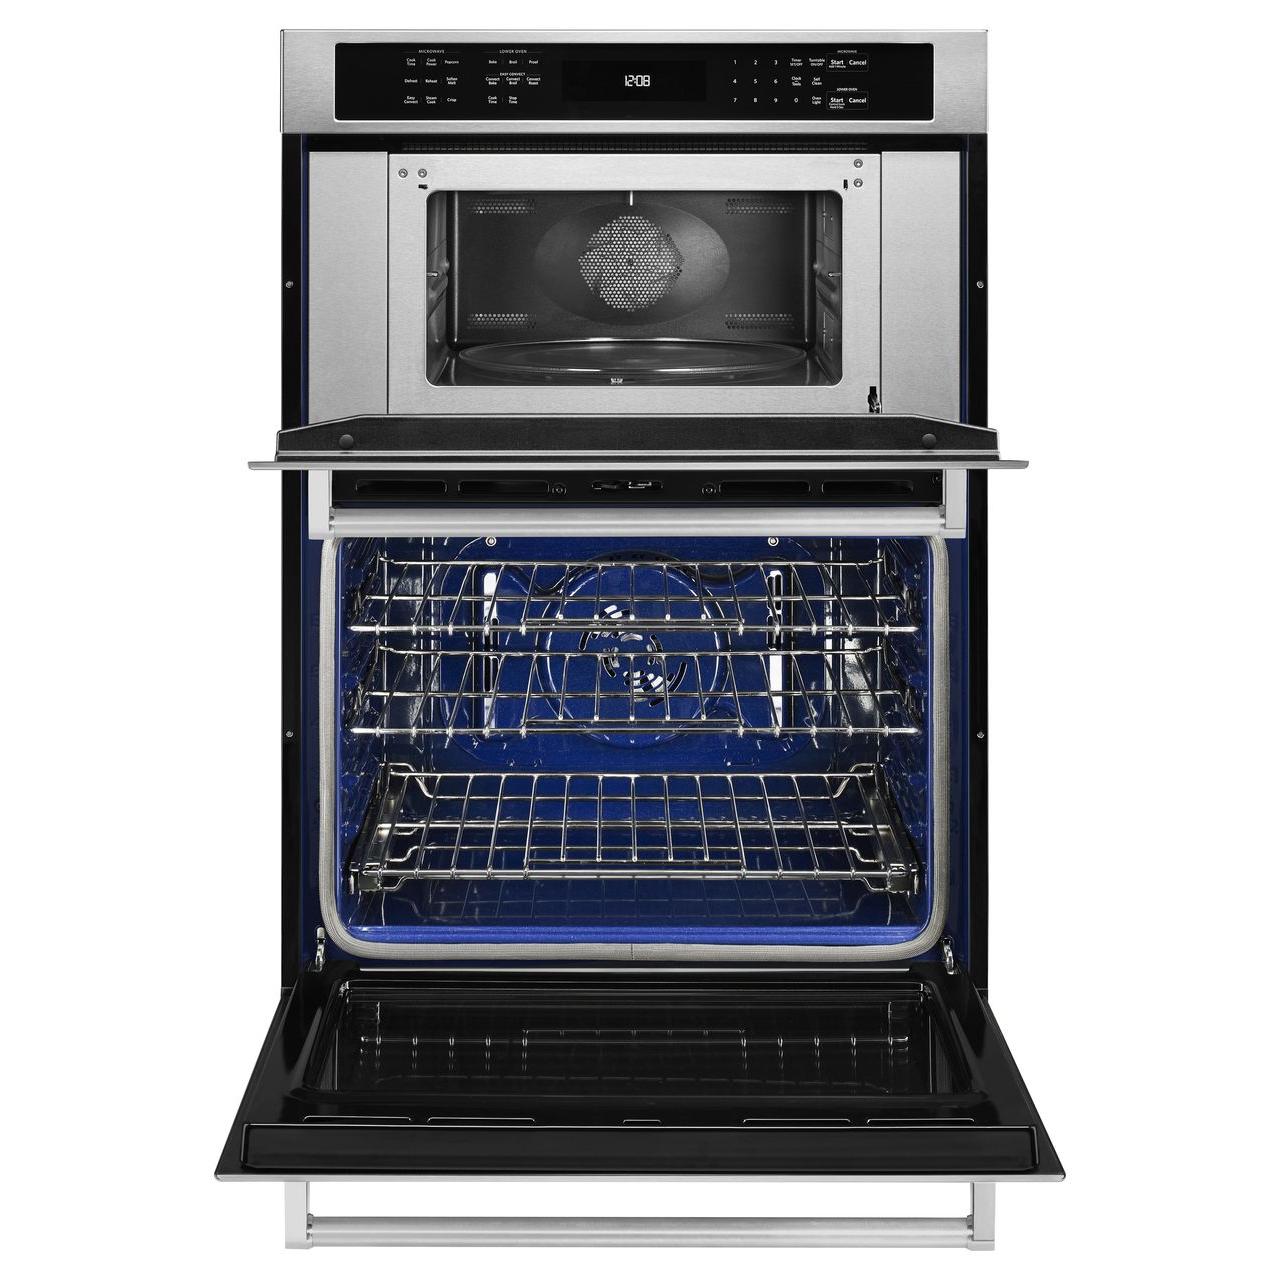 KitchenAid 30-inch, 6.4 cu.ft. Built-in Combination Wall Oven with Convection Technology KOCE500ESS